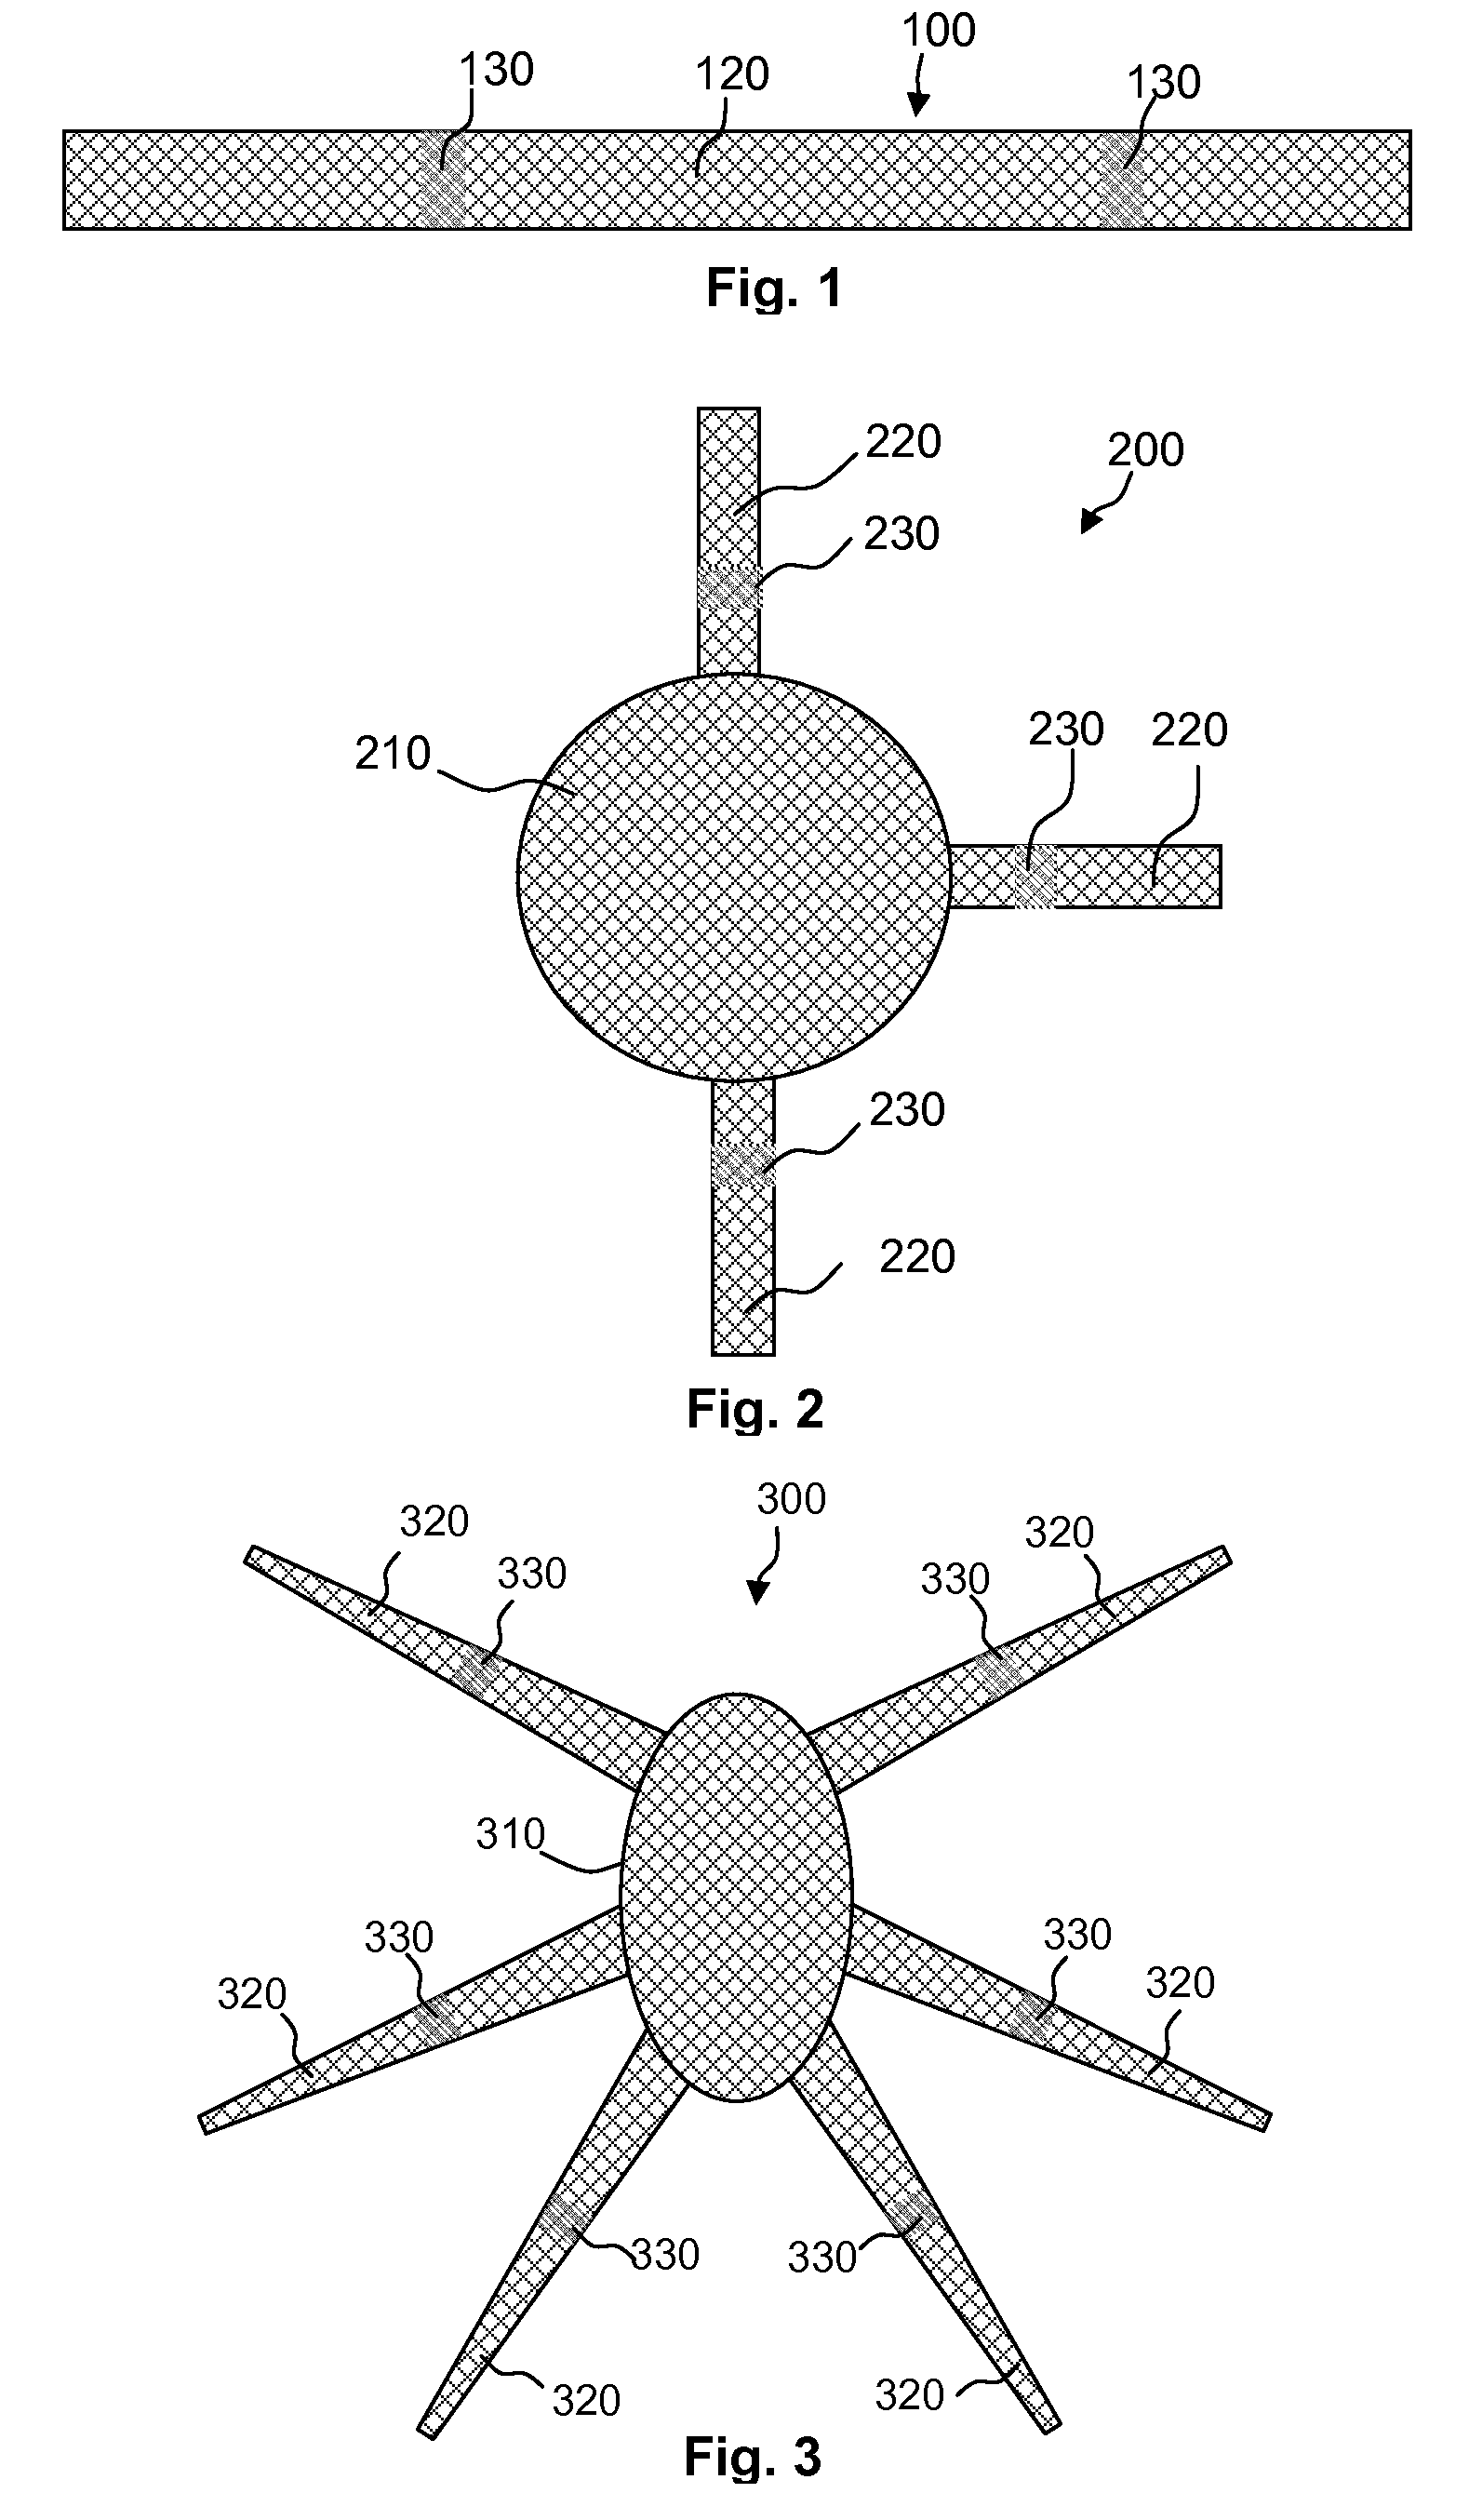 Surgical meshes with radiopaque coatings